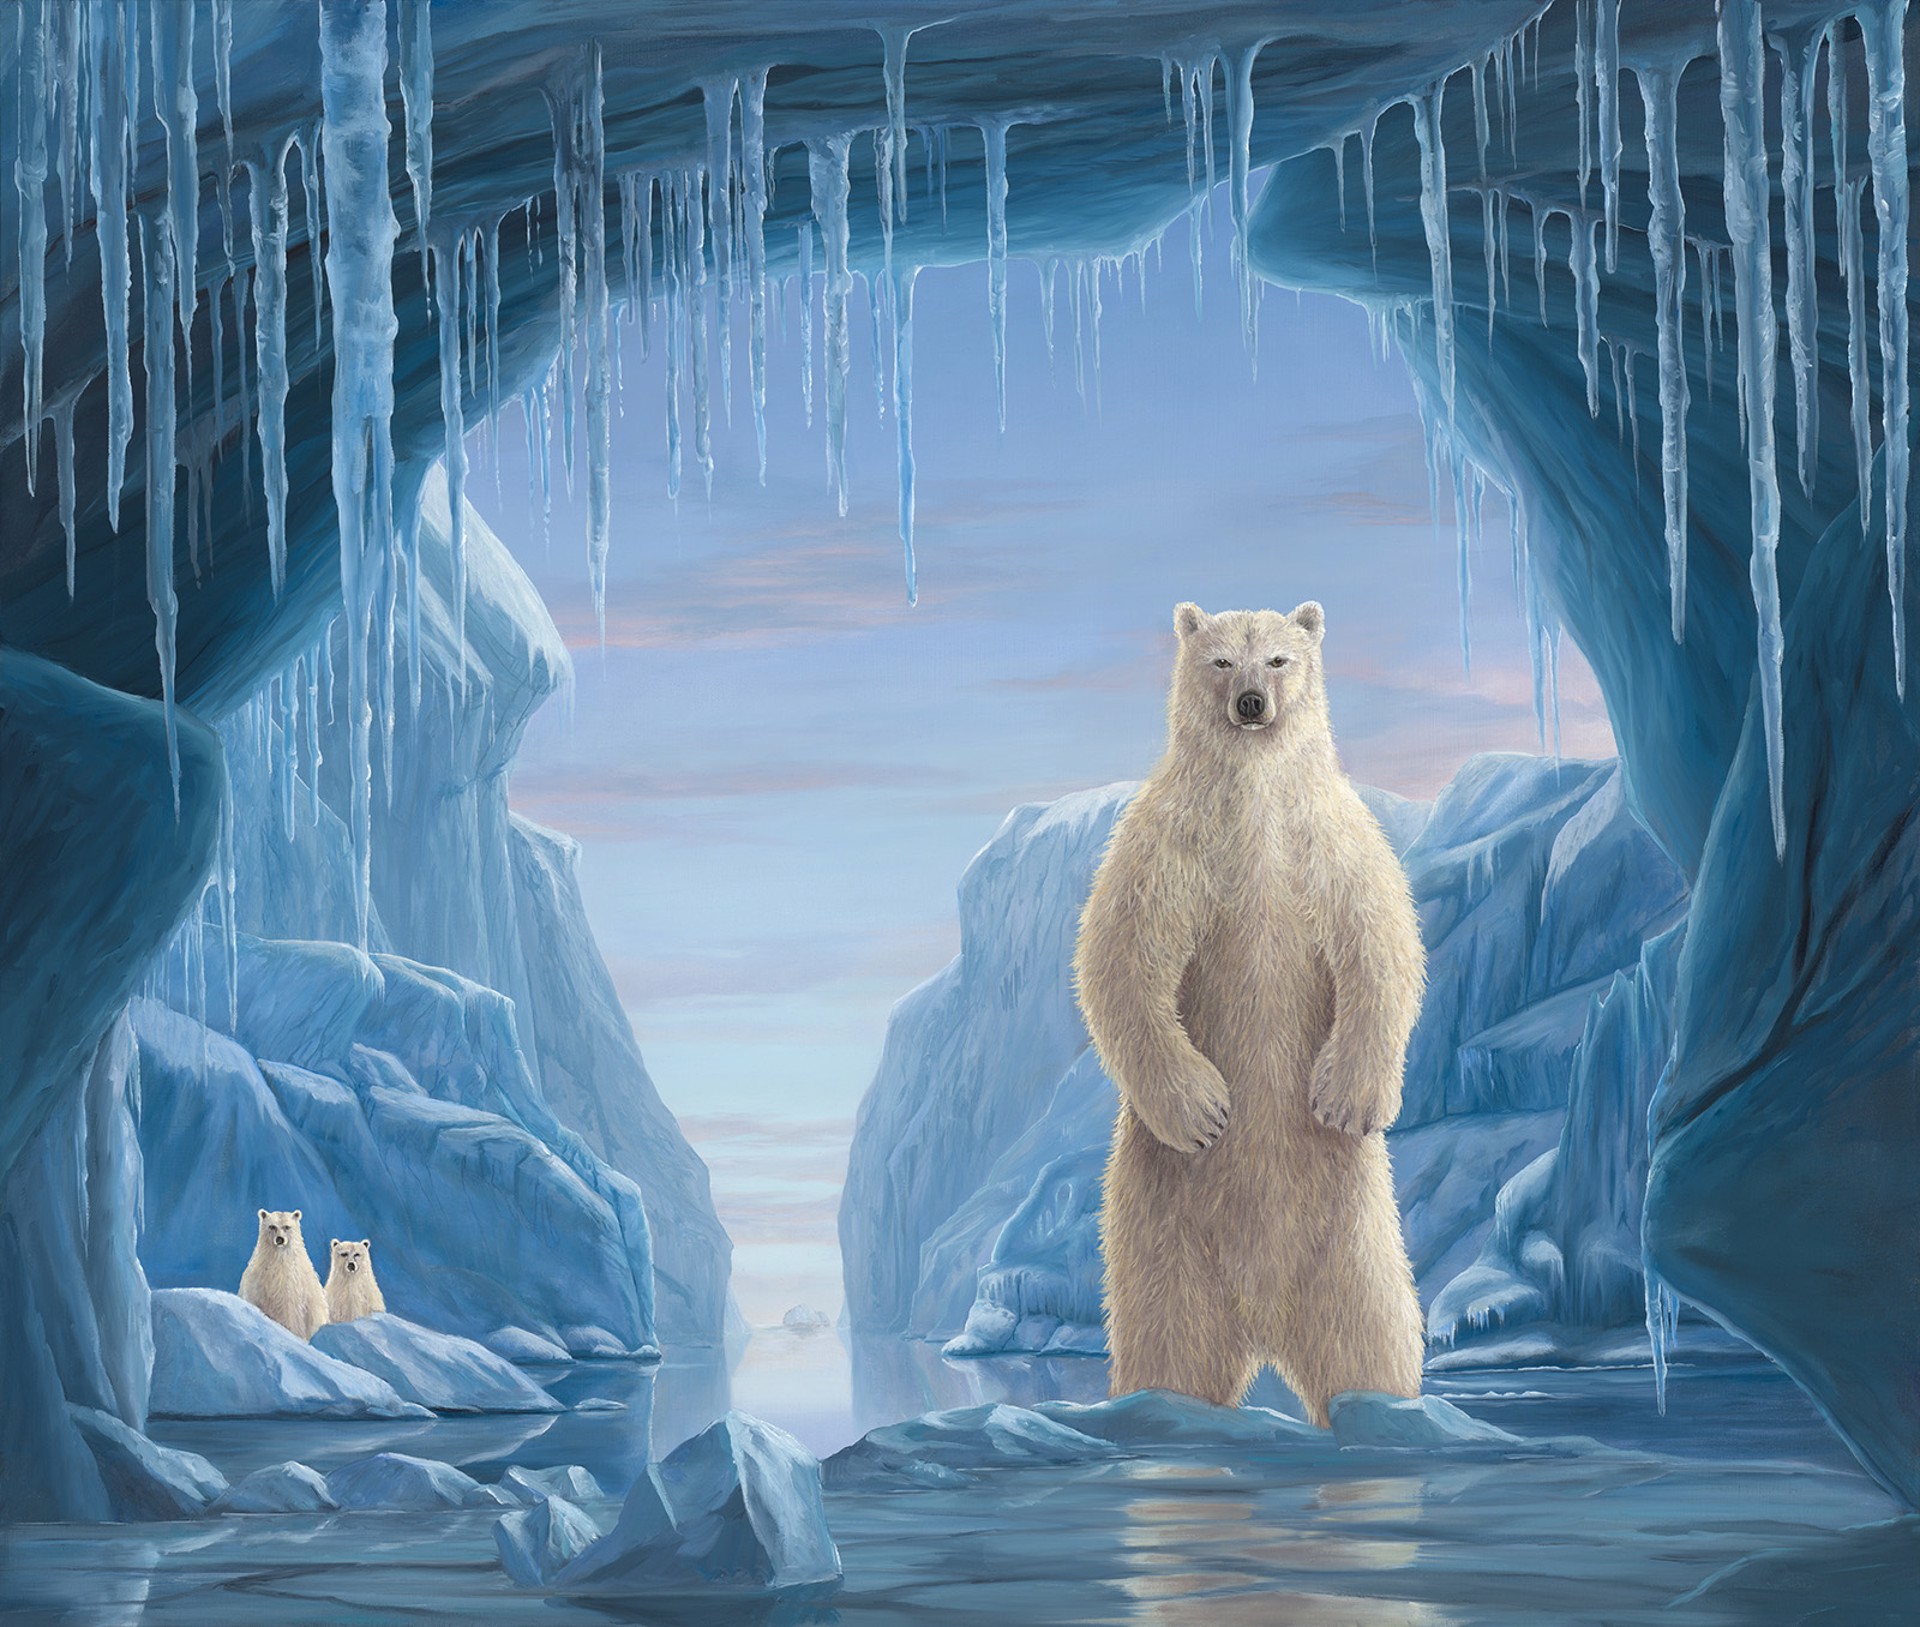 The Guardian by Robert Bissell